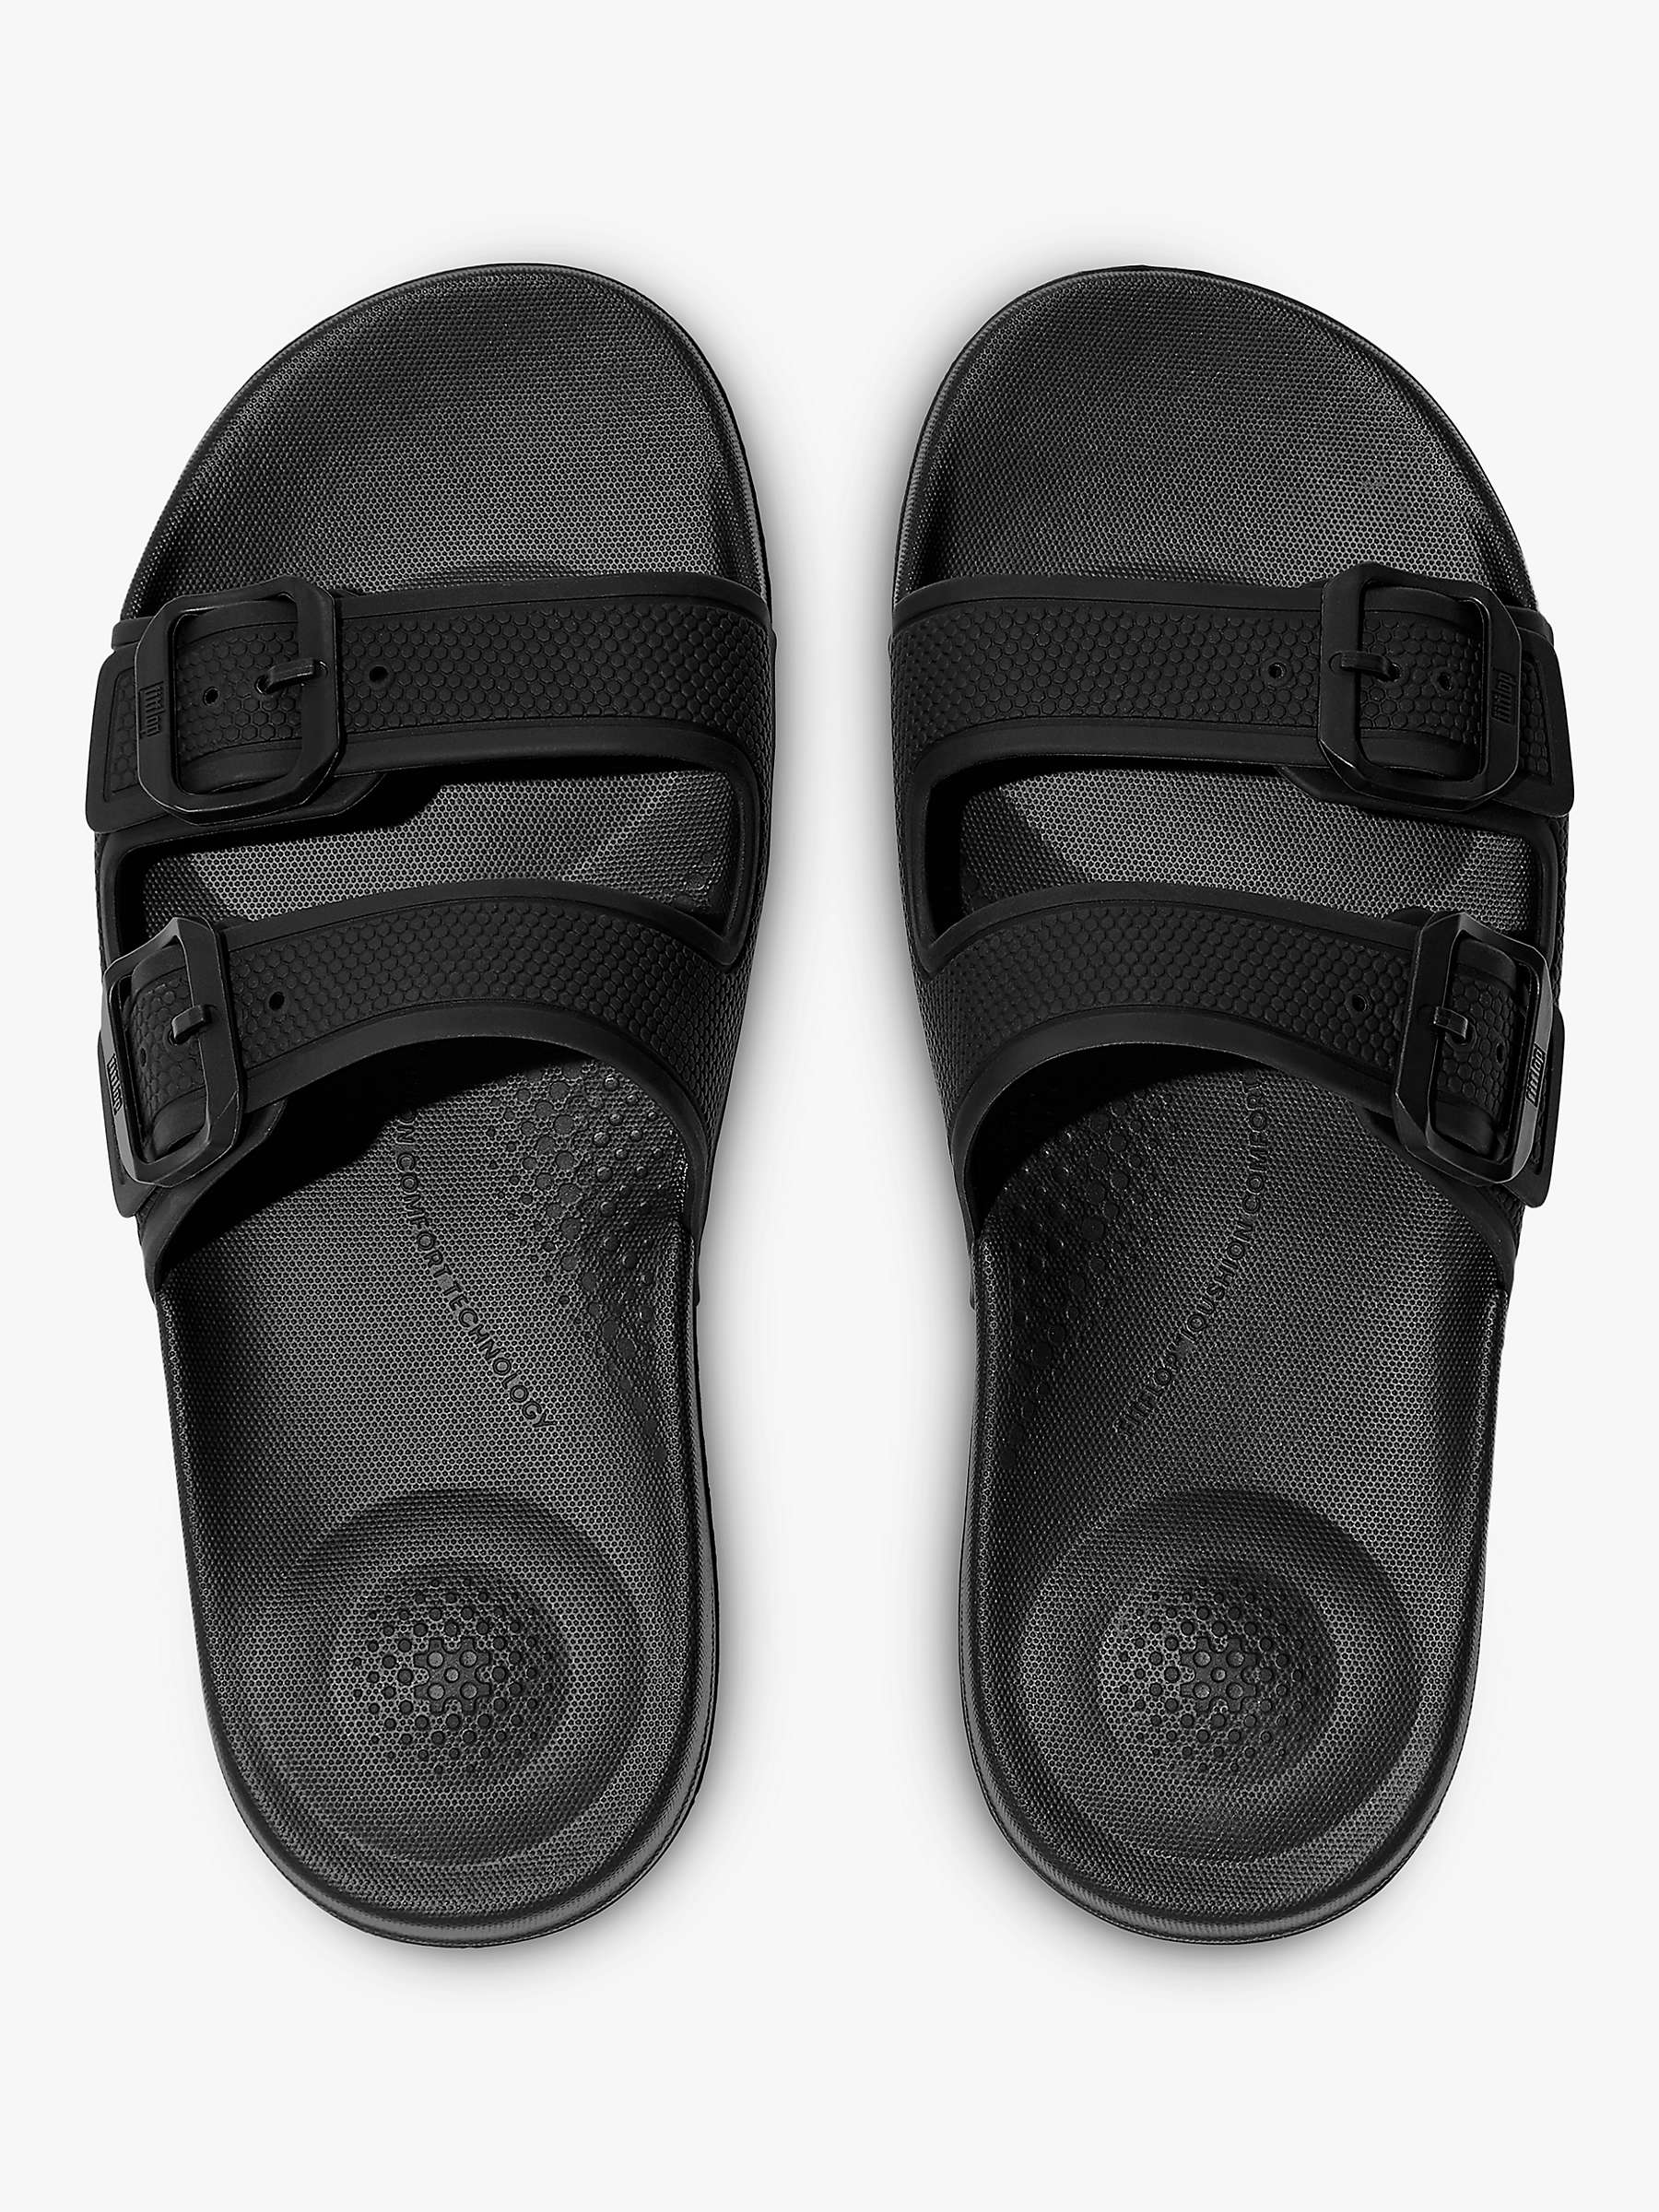 FitFlop IQushion Slider Sandals, All Black at John Lewis & Partners